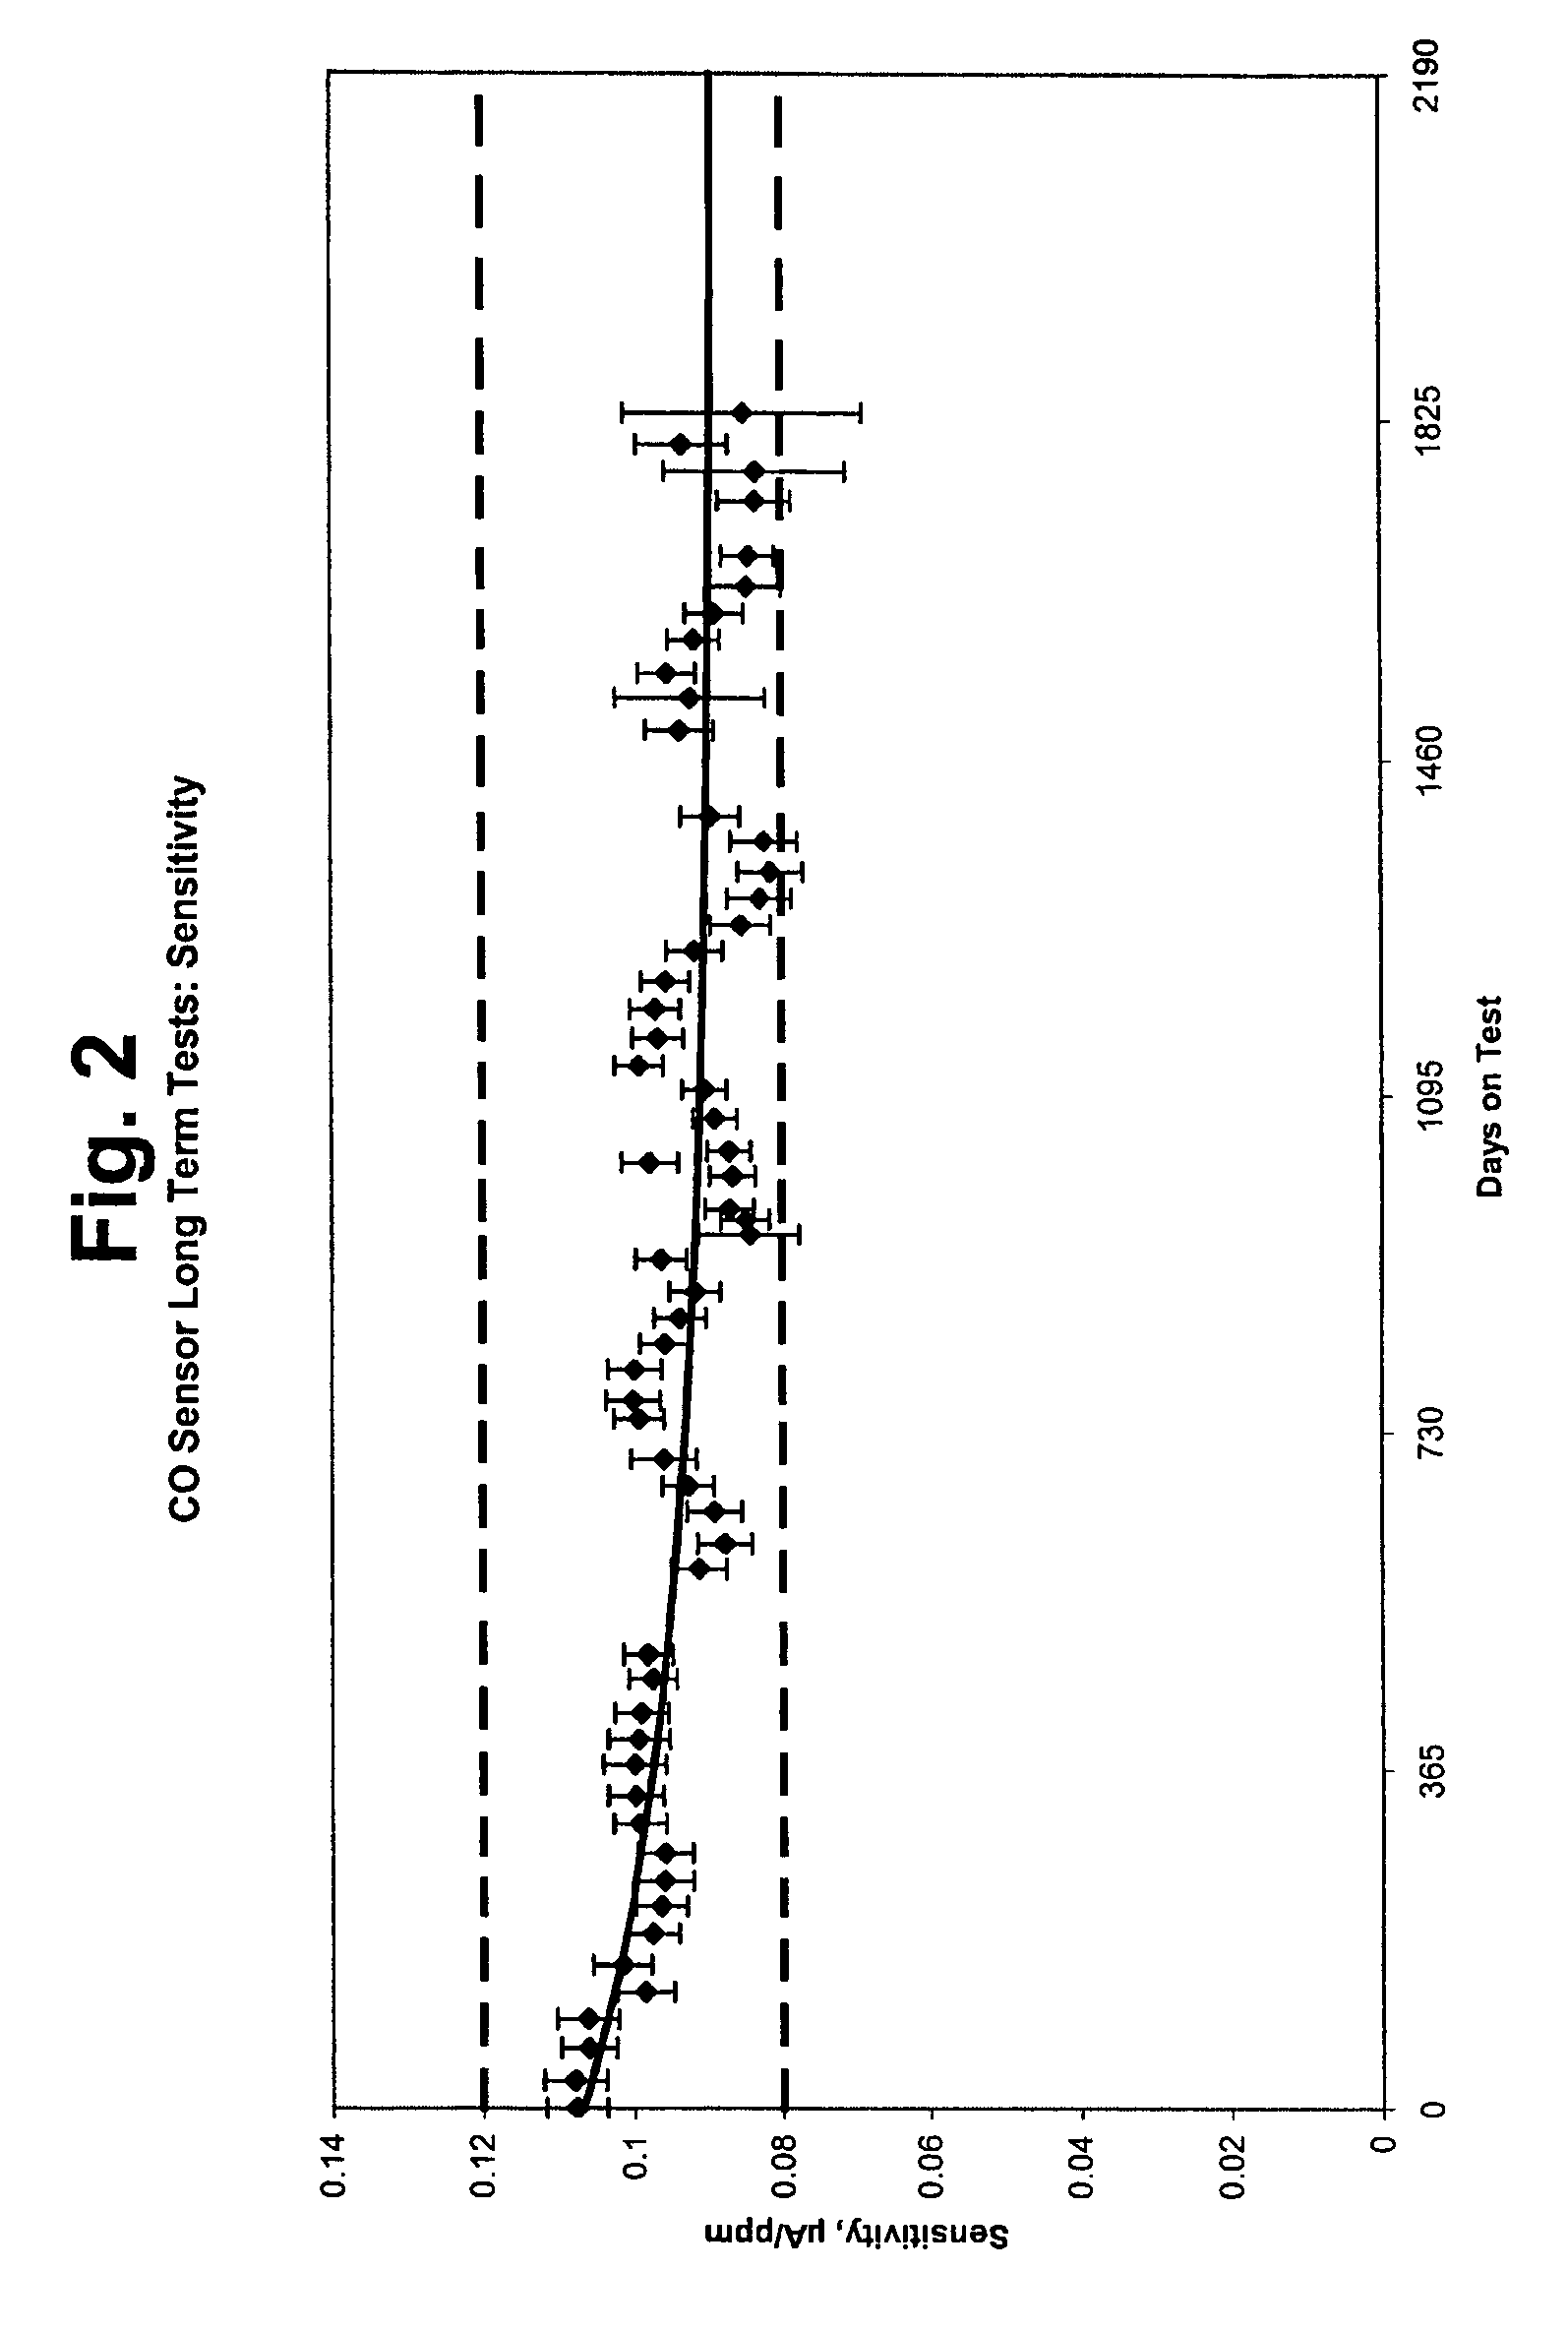 Devices, systems and methods for testing gas sensors and correcting gas sensor output